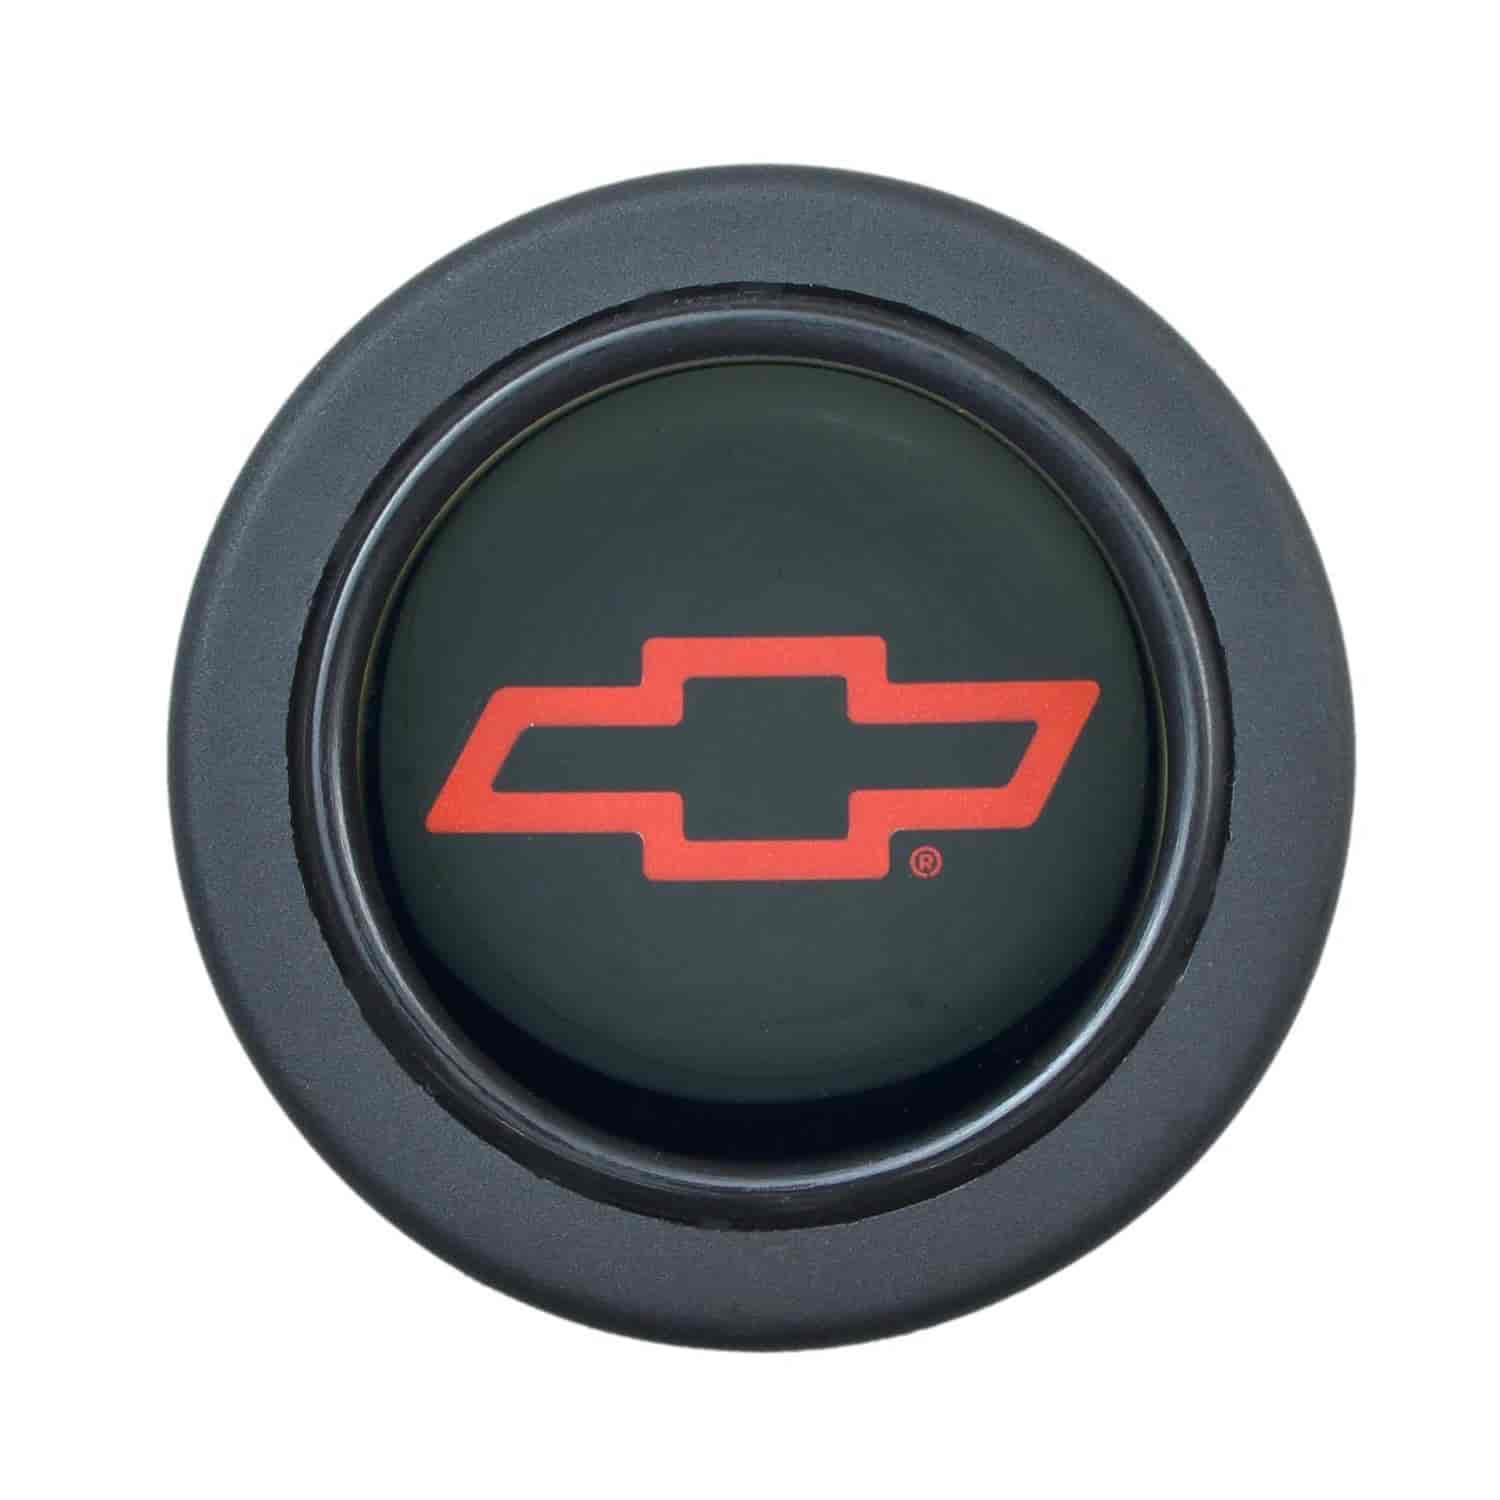 Euro Horn Button Chevy Bowtie - Black Anodized